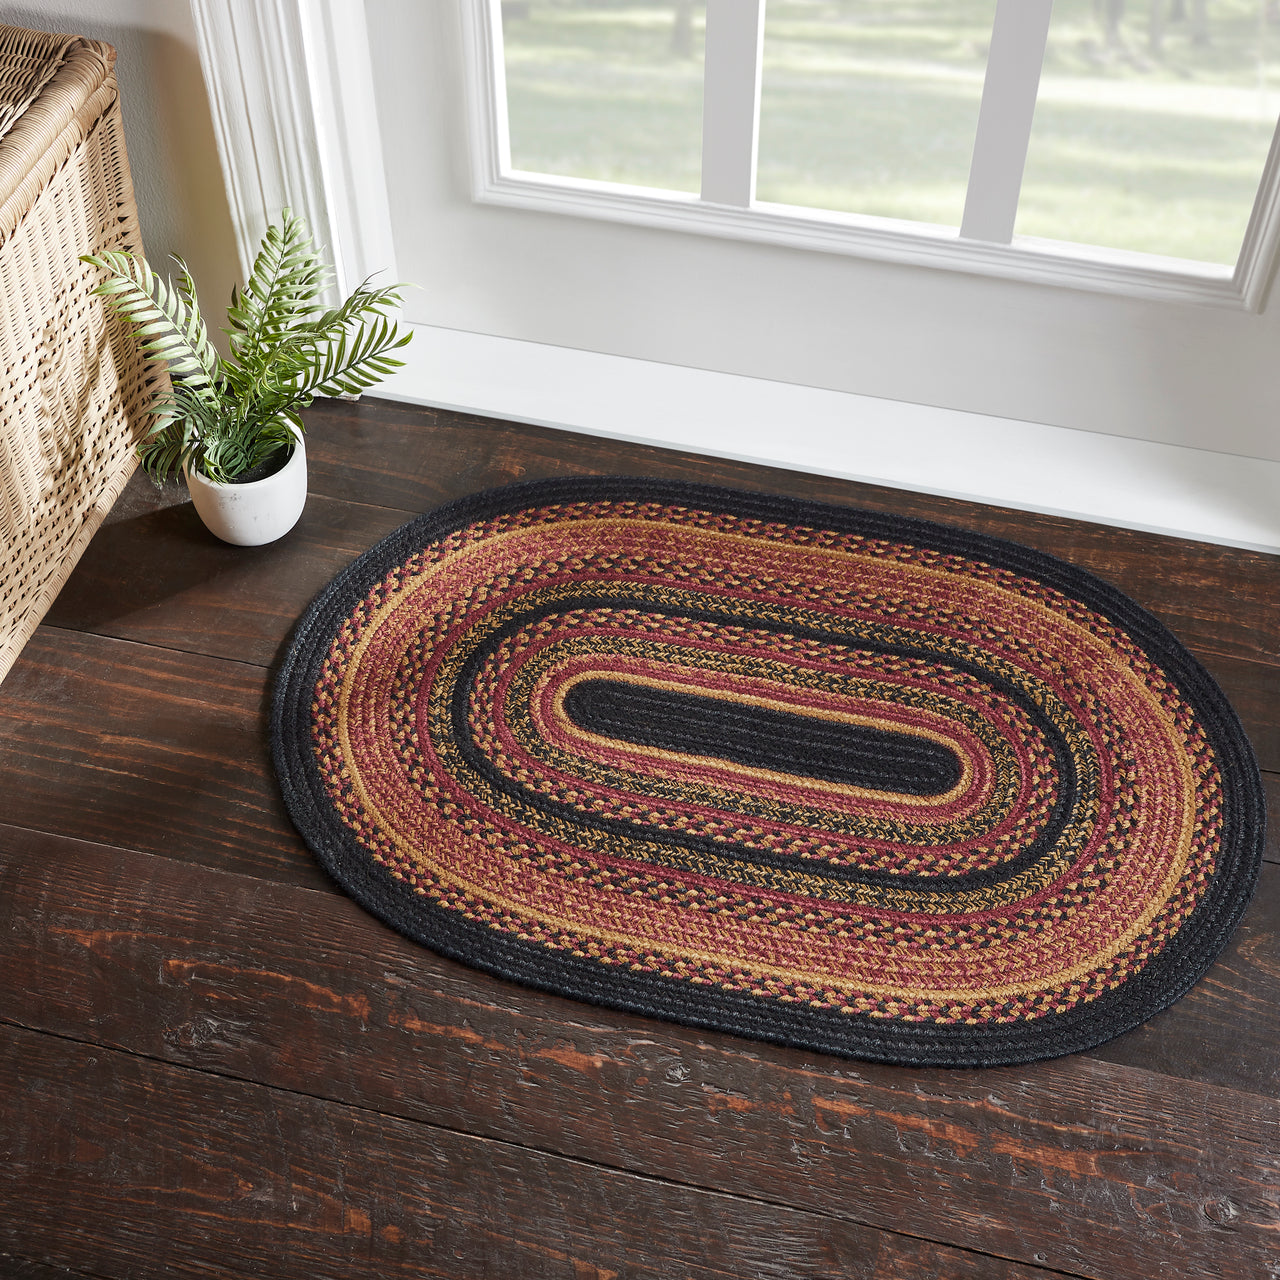 Heritage Farms Jute Braided Rug Oval with Rug Pad 24"x36" VHC Brands